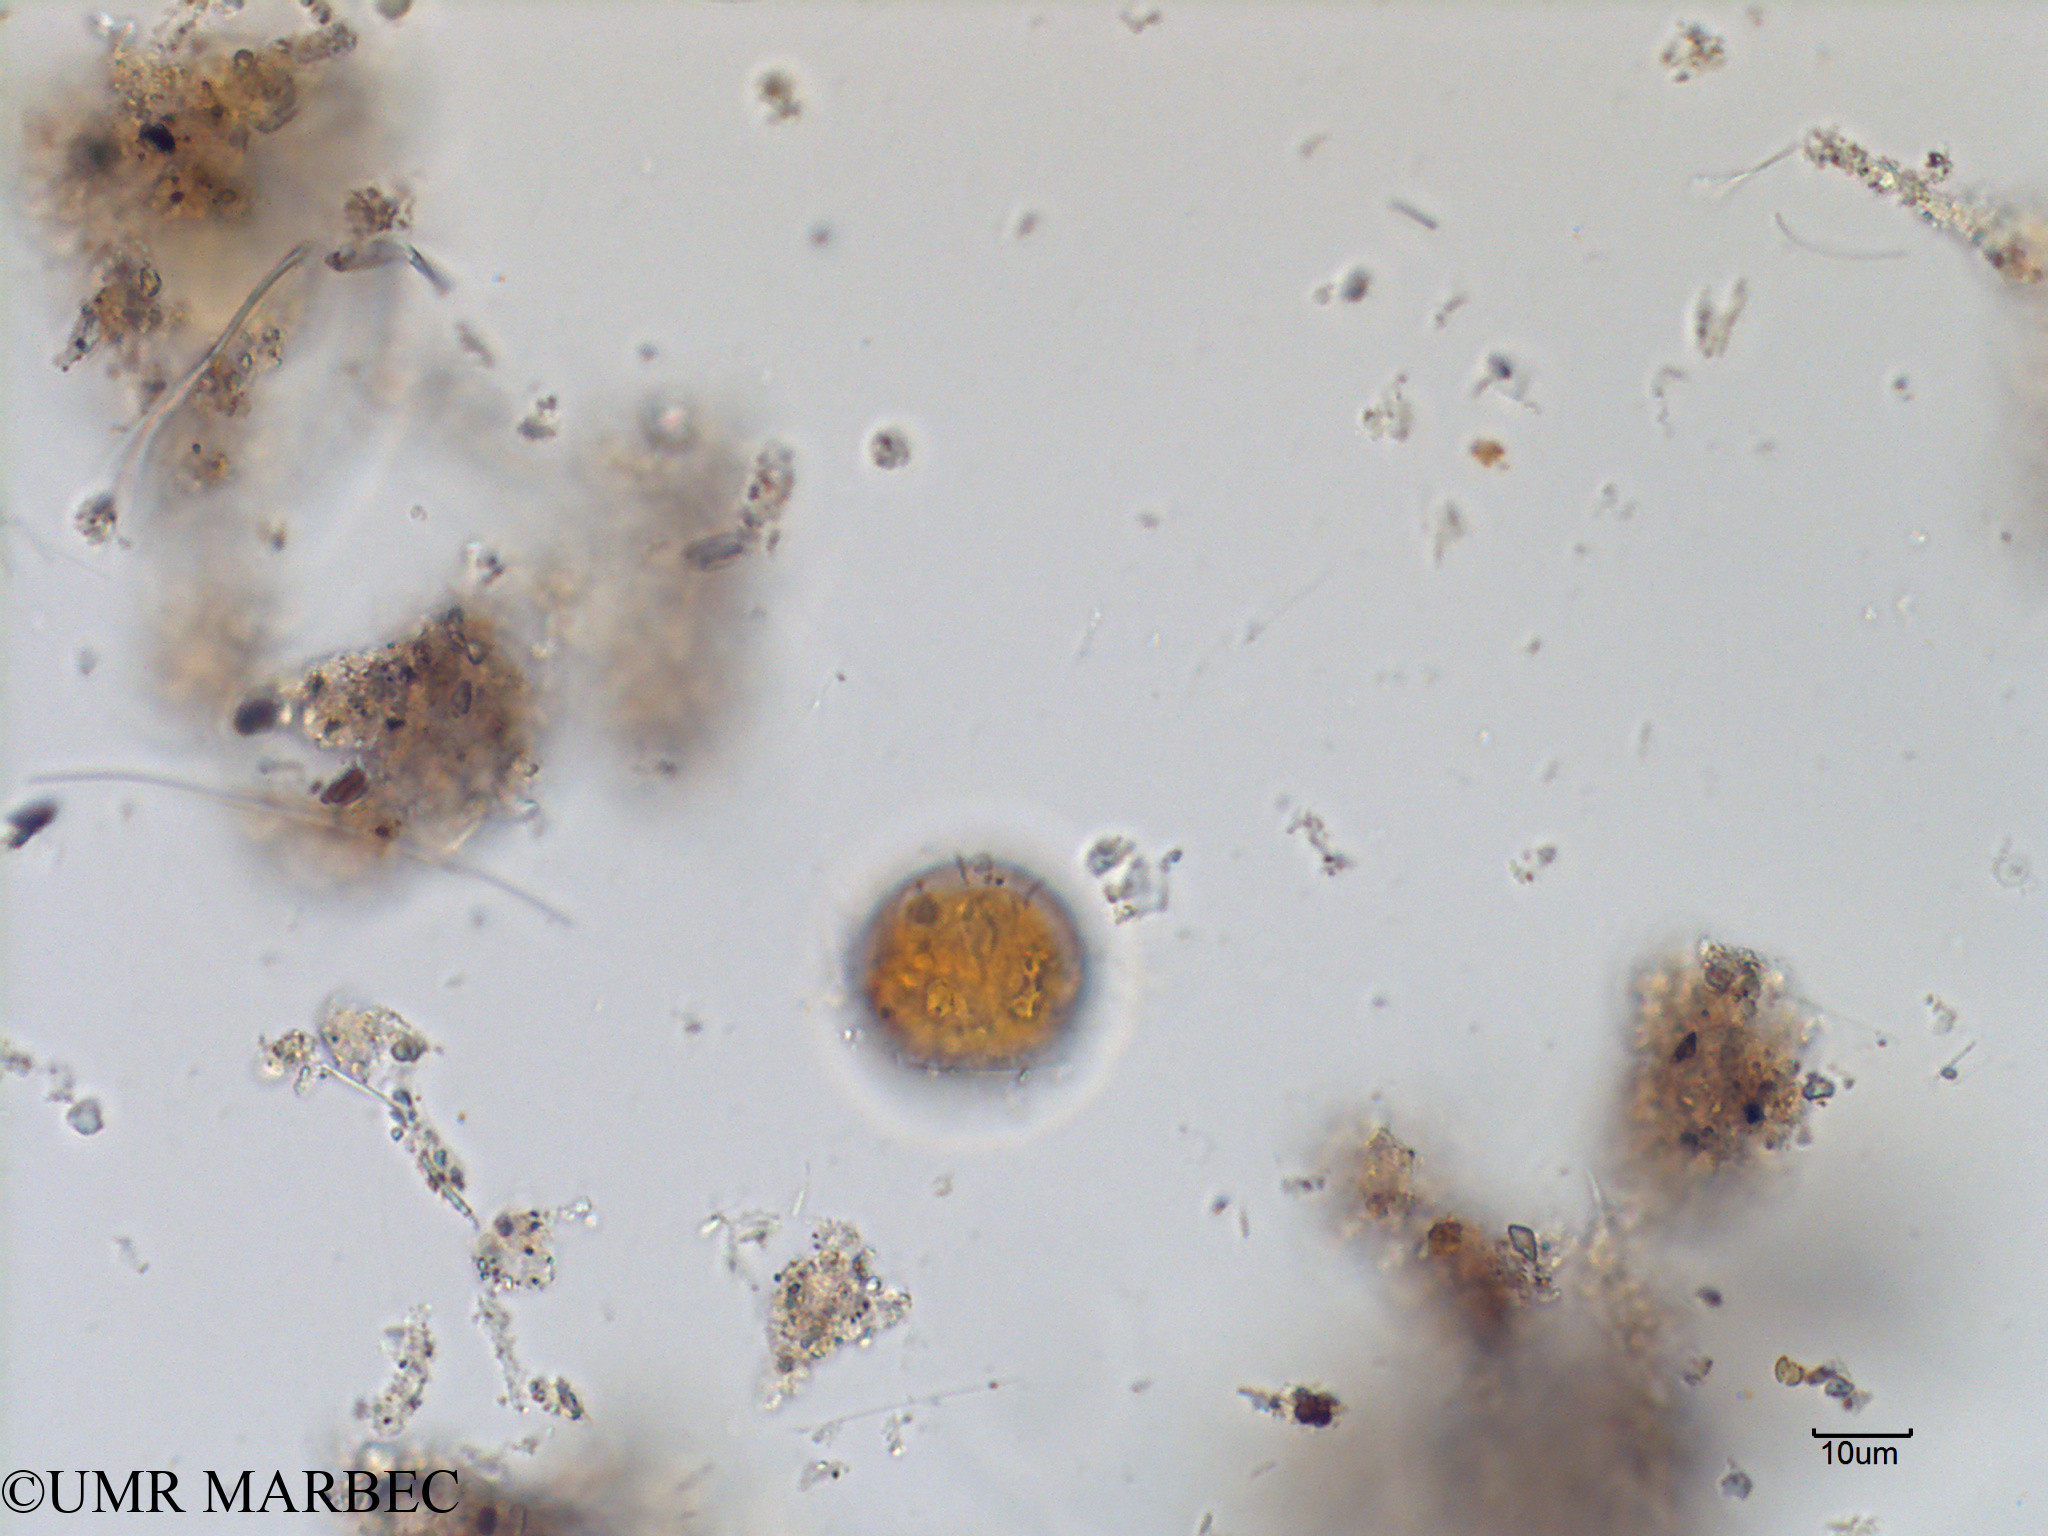 phyto/Scattered_Islands/mayotte_lagoon/SIREME May 2016/Protoperidinium sp42 (MAY4_proto lequel c-3).tif(copy).jpg